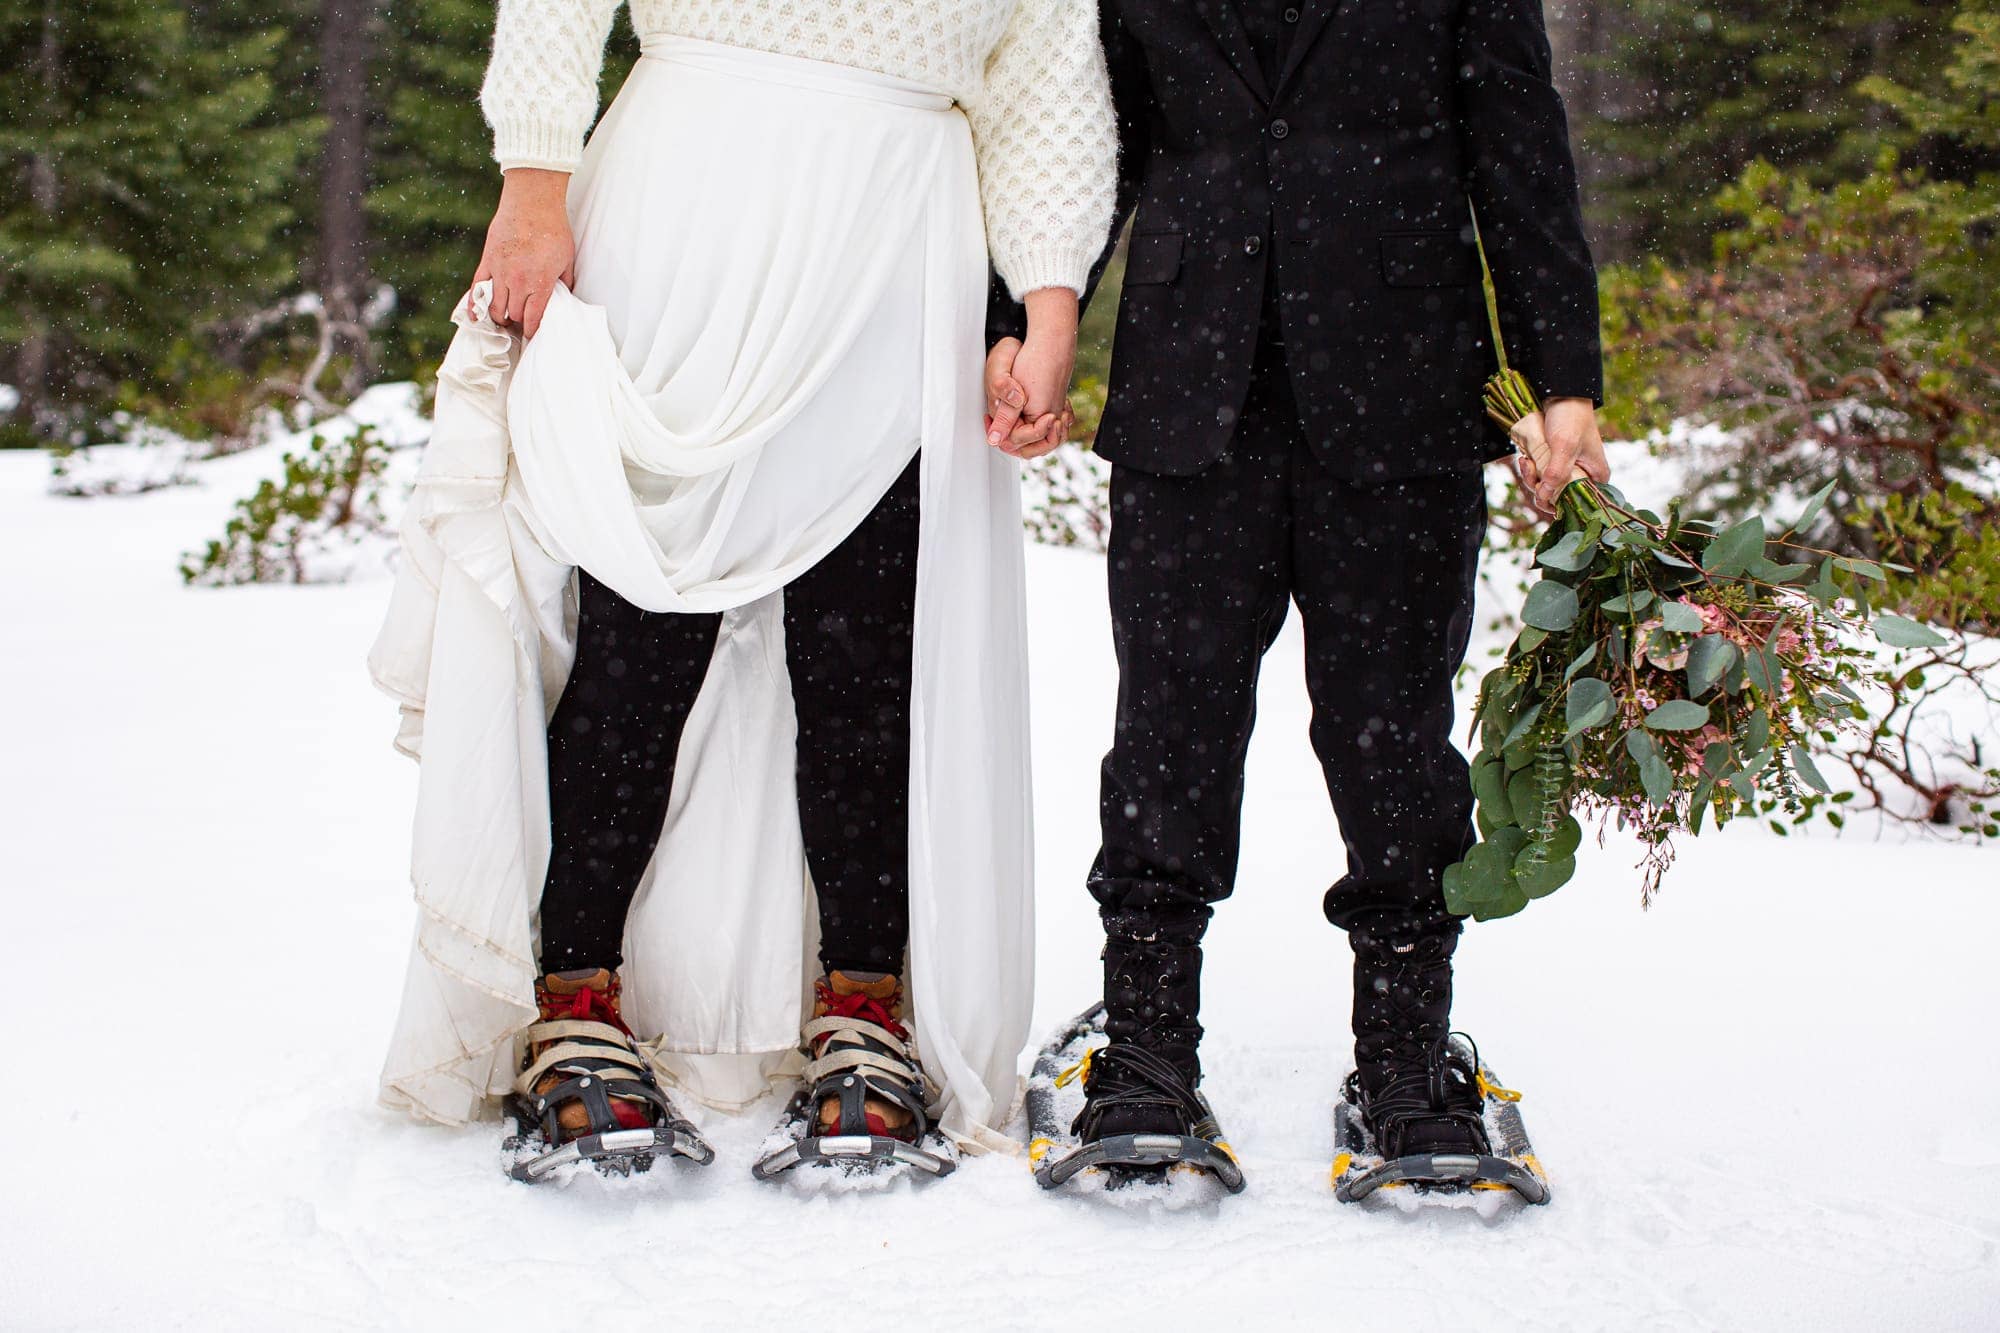 Bride and groom showing off their snowshoes in the snow with the groom holding the bouquet while the bride holds her skirt aside